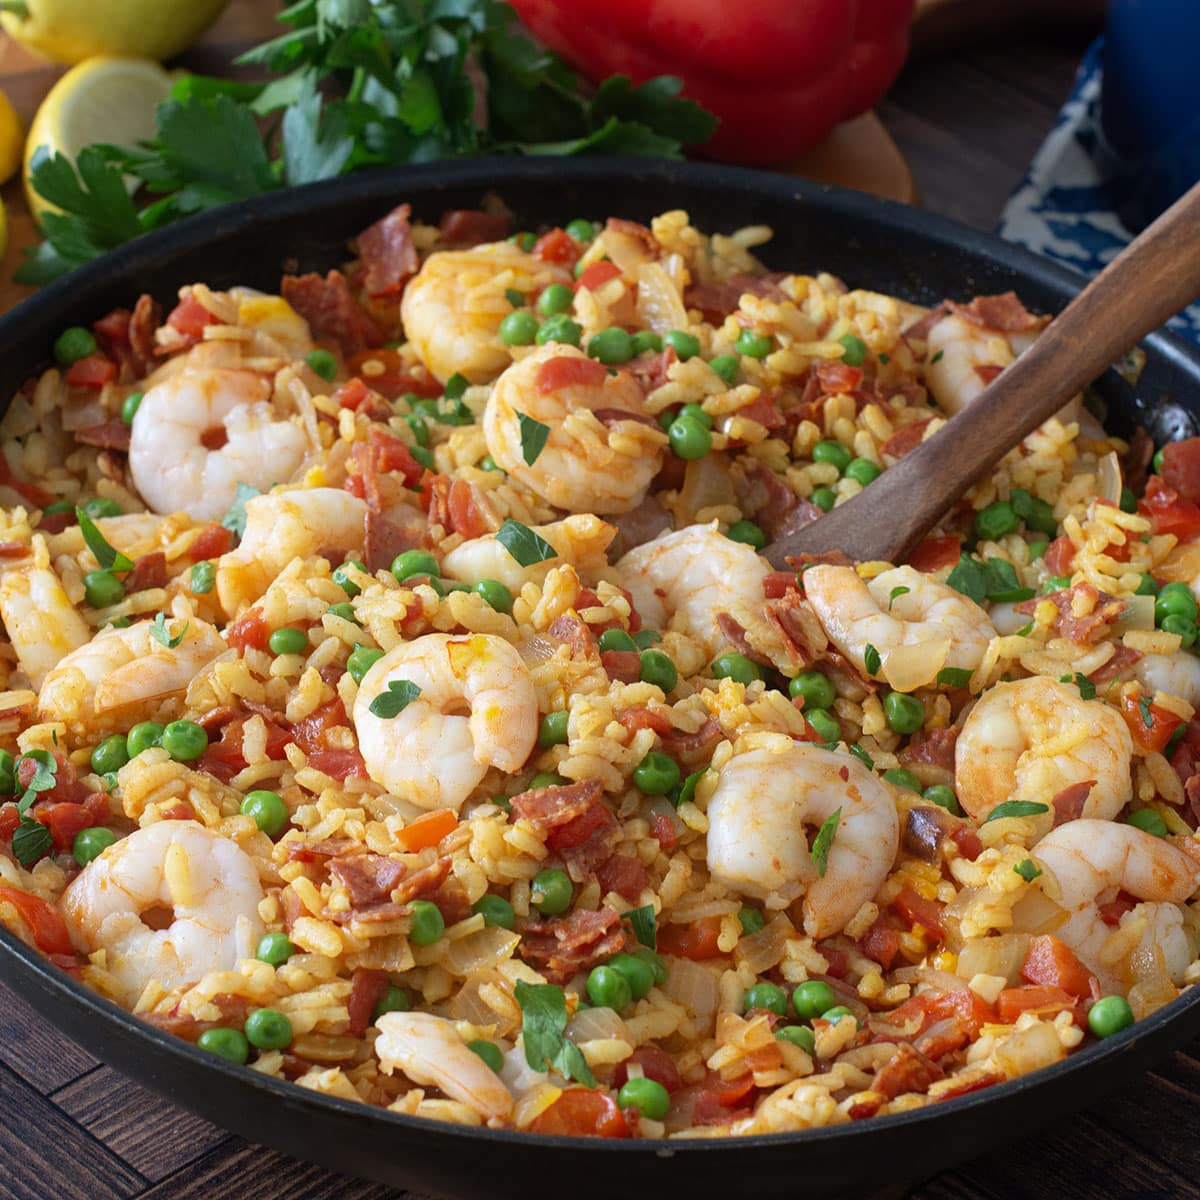 Pan of shrimp paella with peas and parsley.